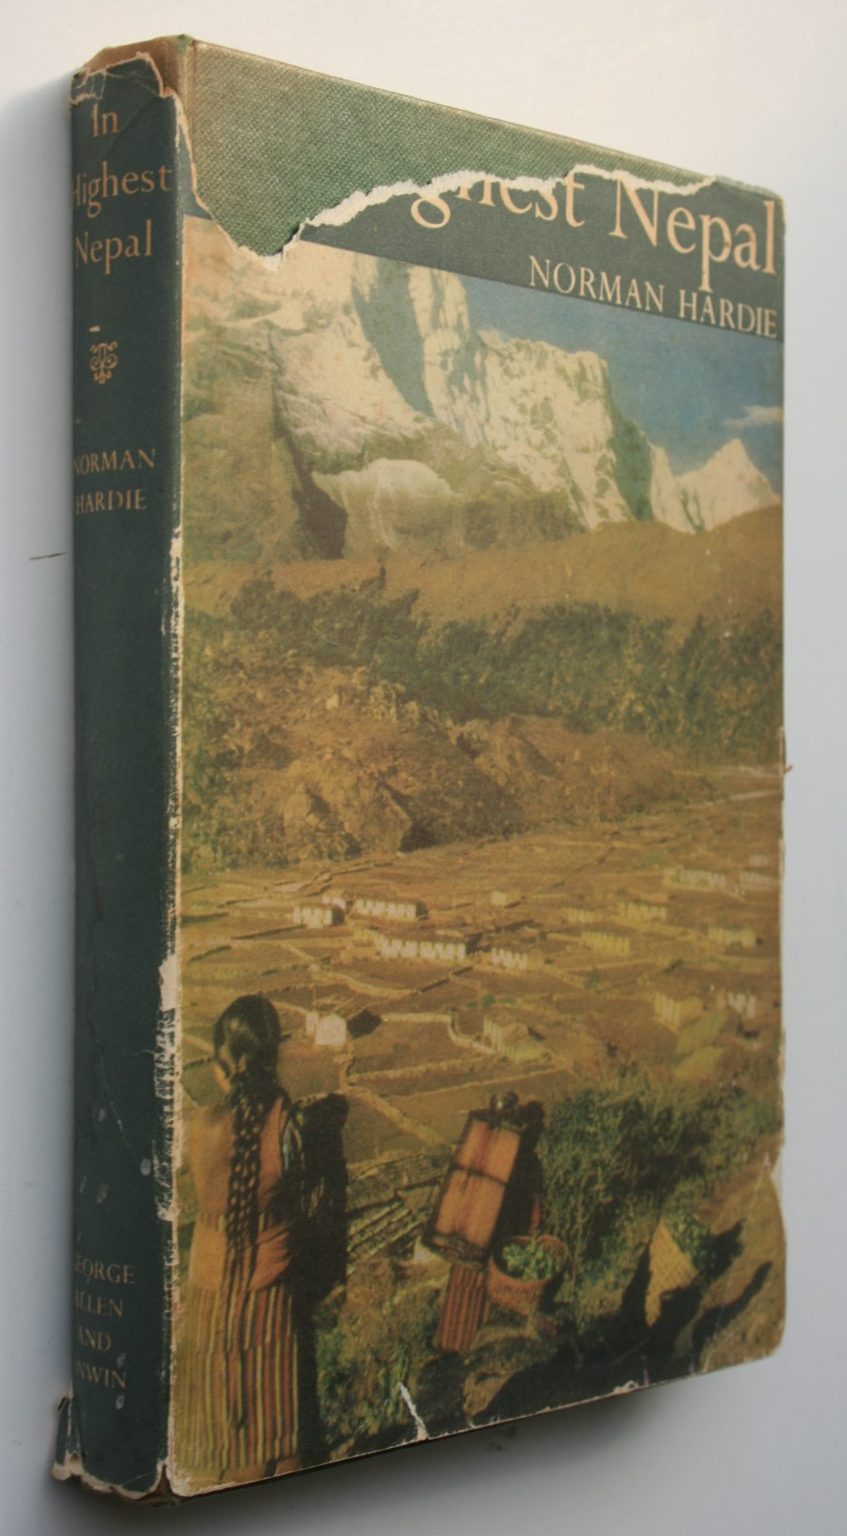 In Highest Nepal.  Our Life Among the Sherpas. First edition 1957